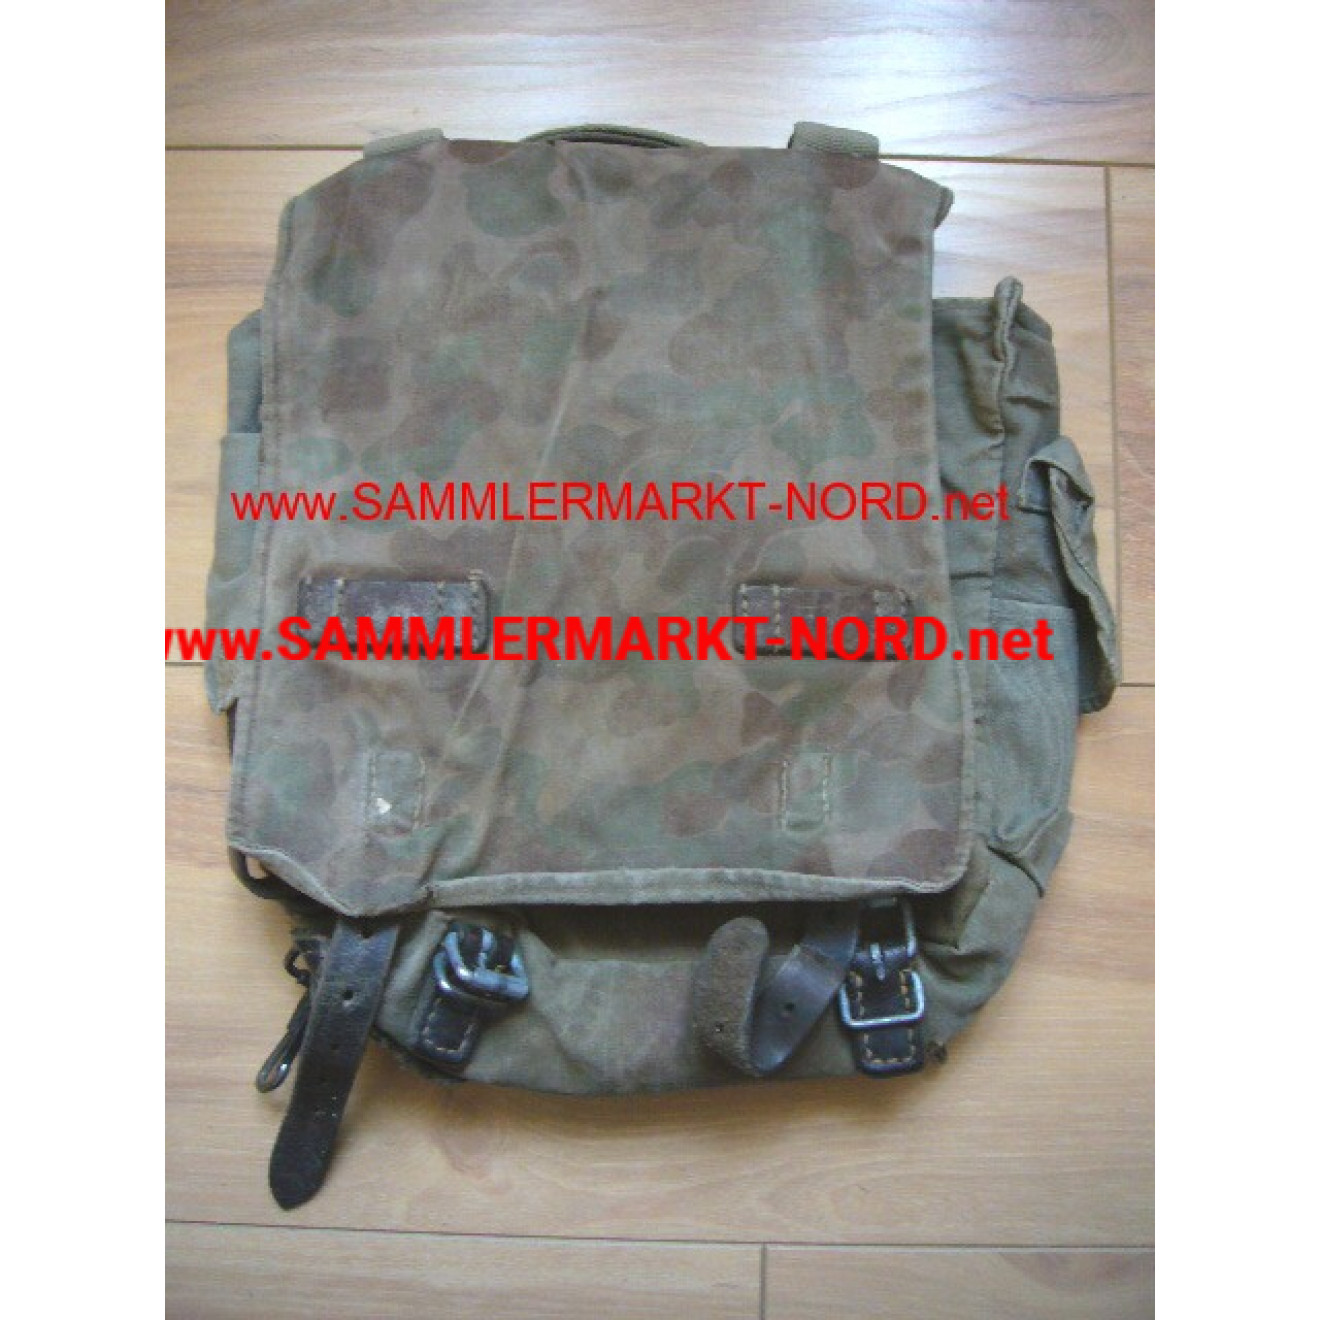 Military bag with camouflage patterns (Waffen-SS?)